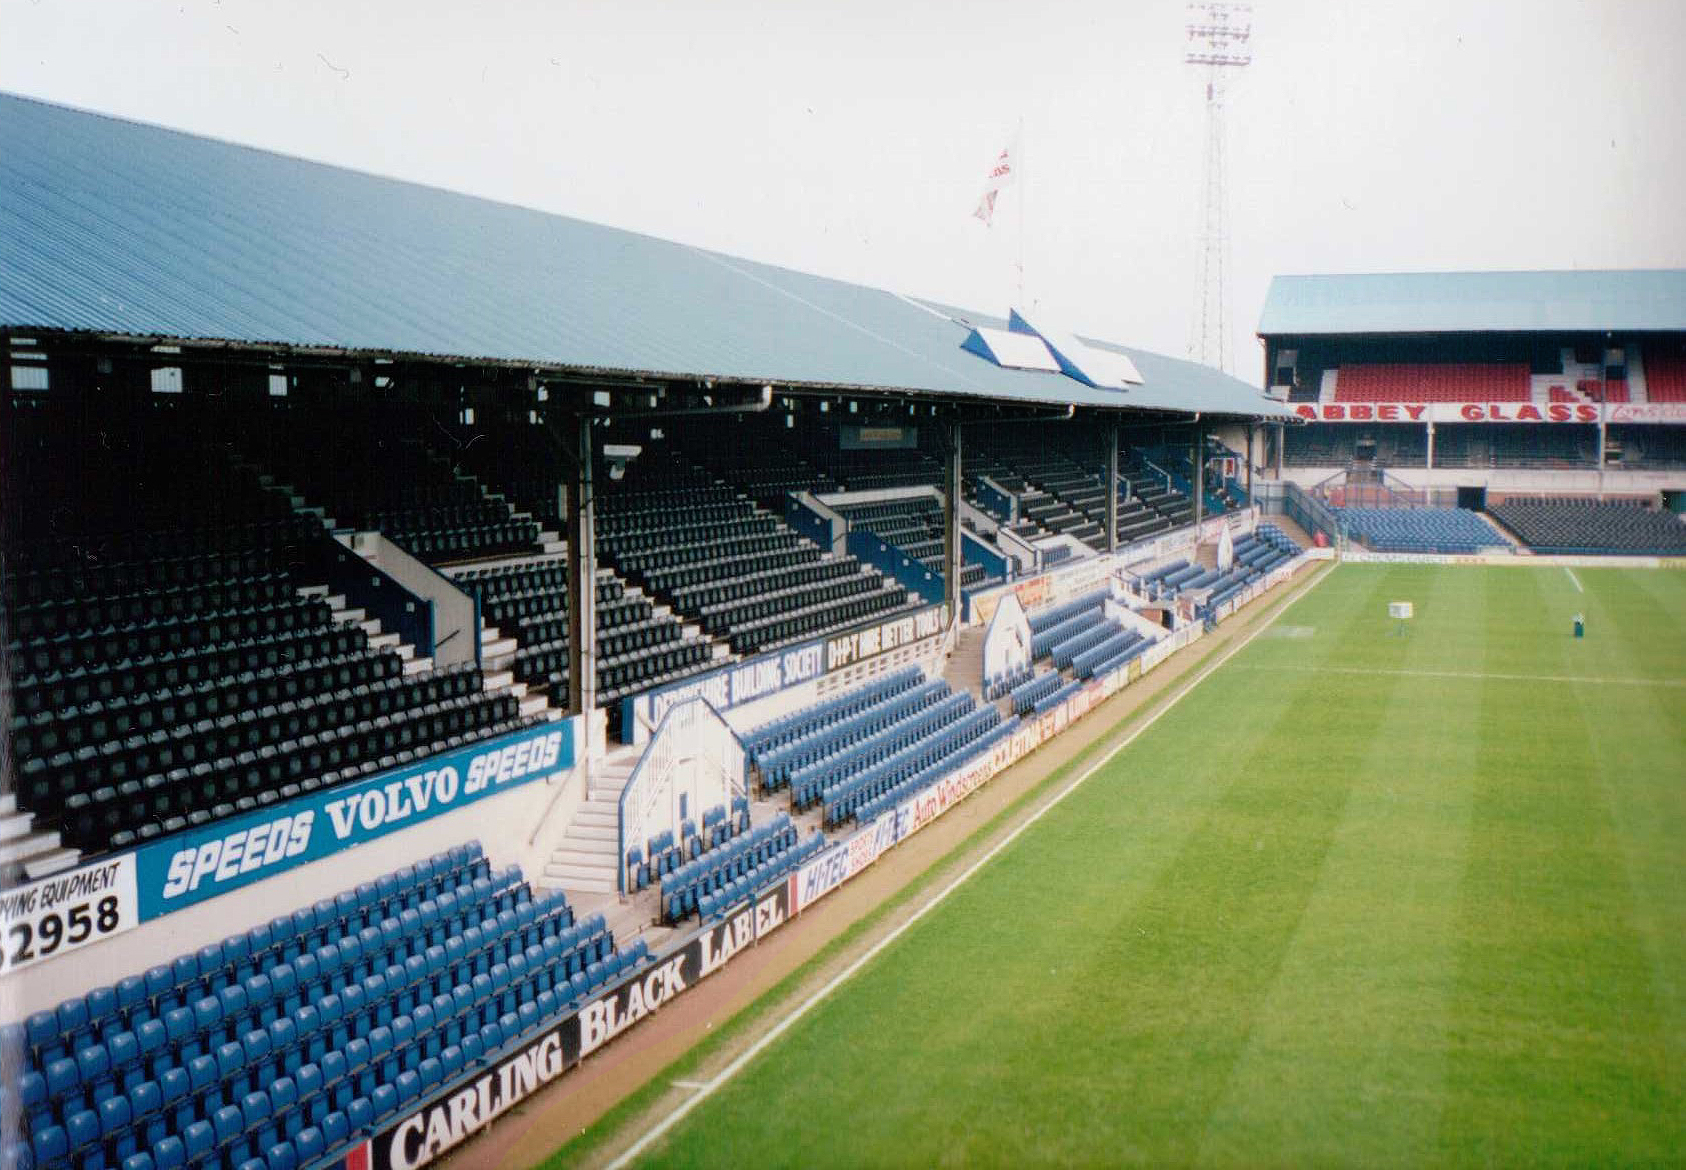 Paul Groundtastic Twitter: "GROUNDS IN THE NINETIES (24) Derby County played at the Baseball Ground more than 100 years. The 90s was the last decade at the ground. The